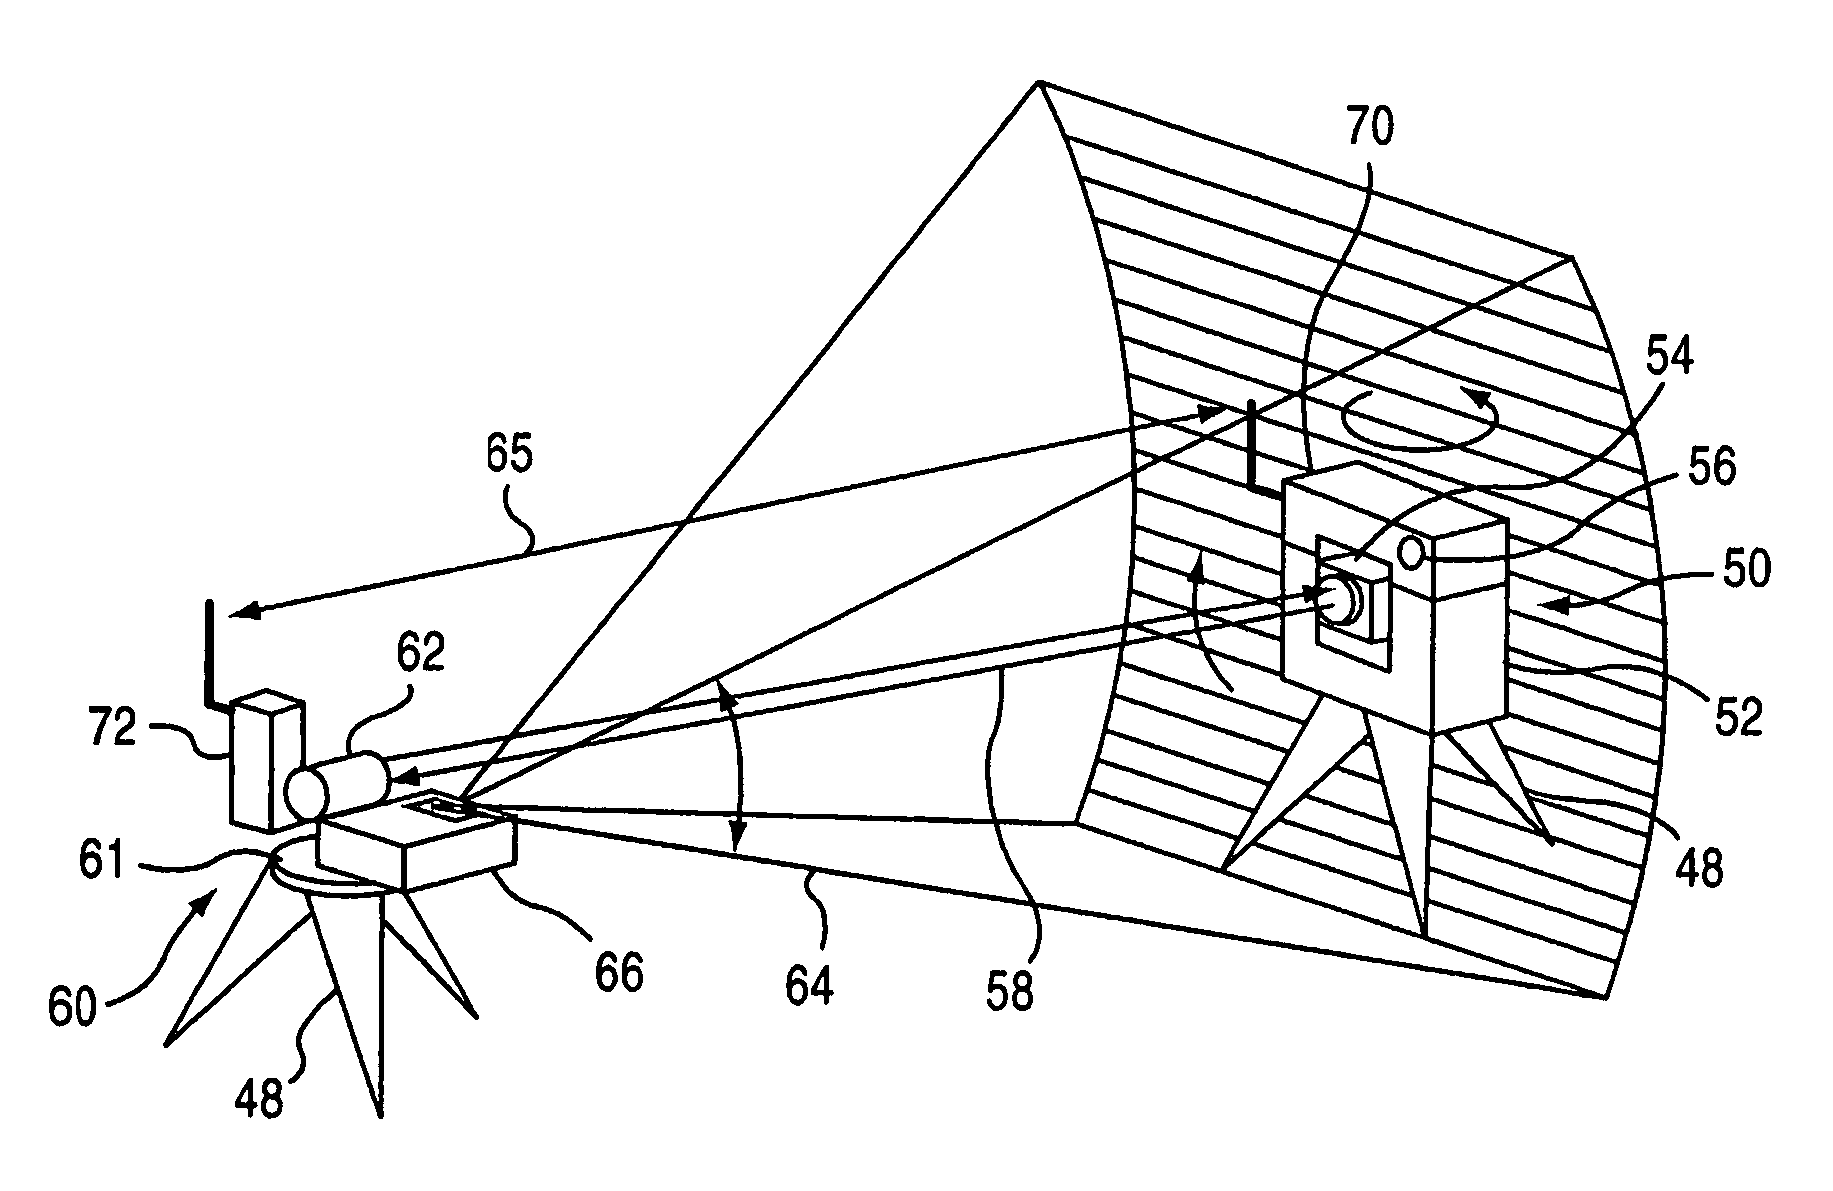 Survey system capable of remotely controlling a surveying instrument